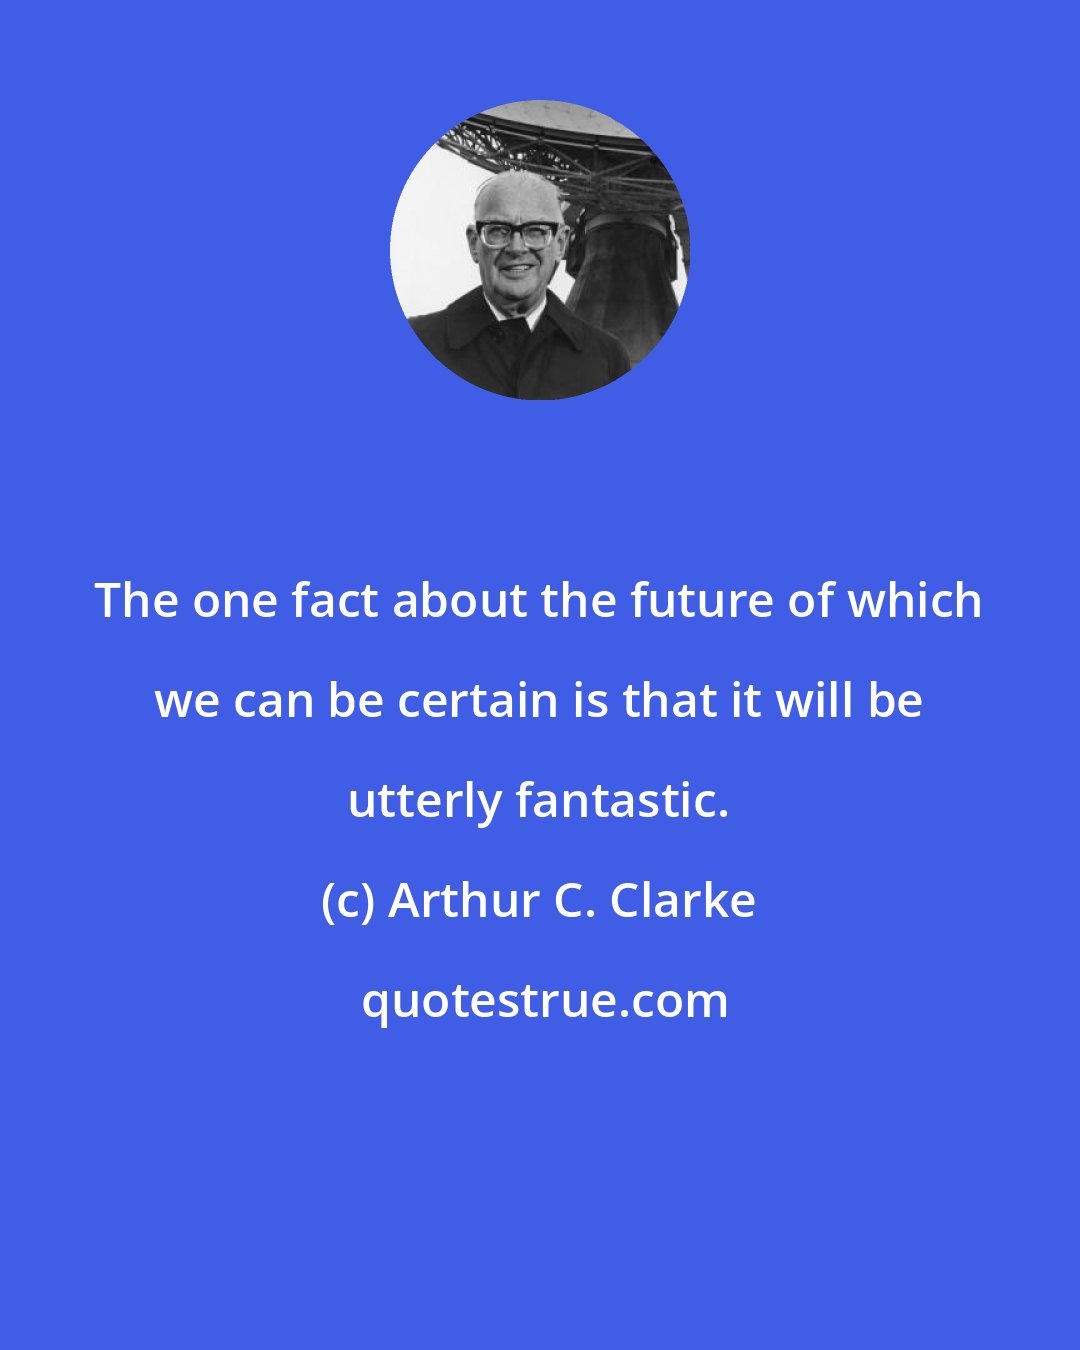 Arthur C. Clarke: The one fact about the future of which we can be certain is that it will be utterly fantastic.